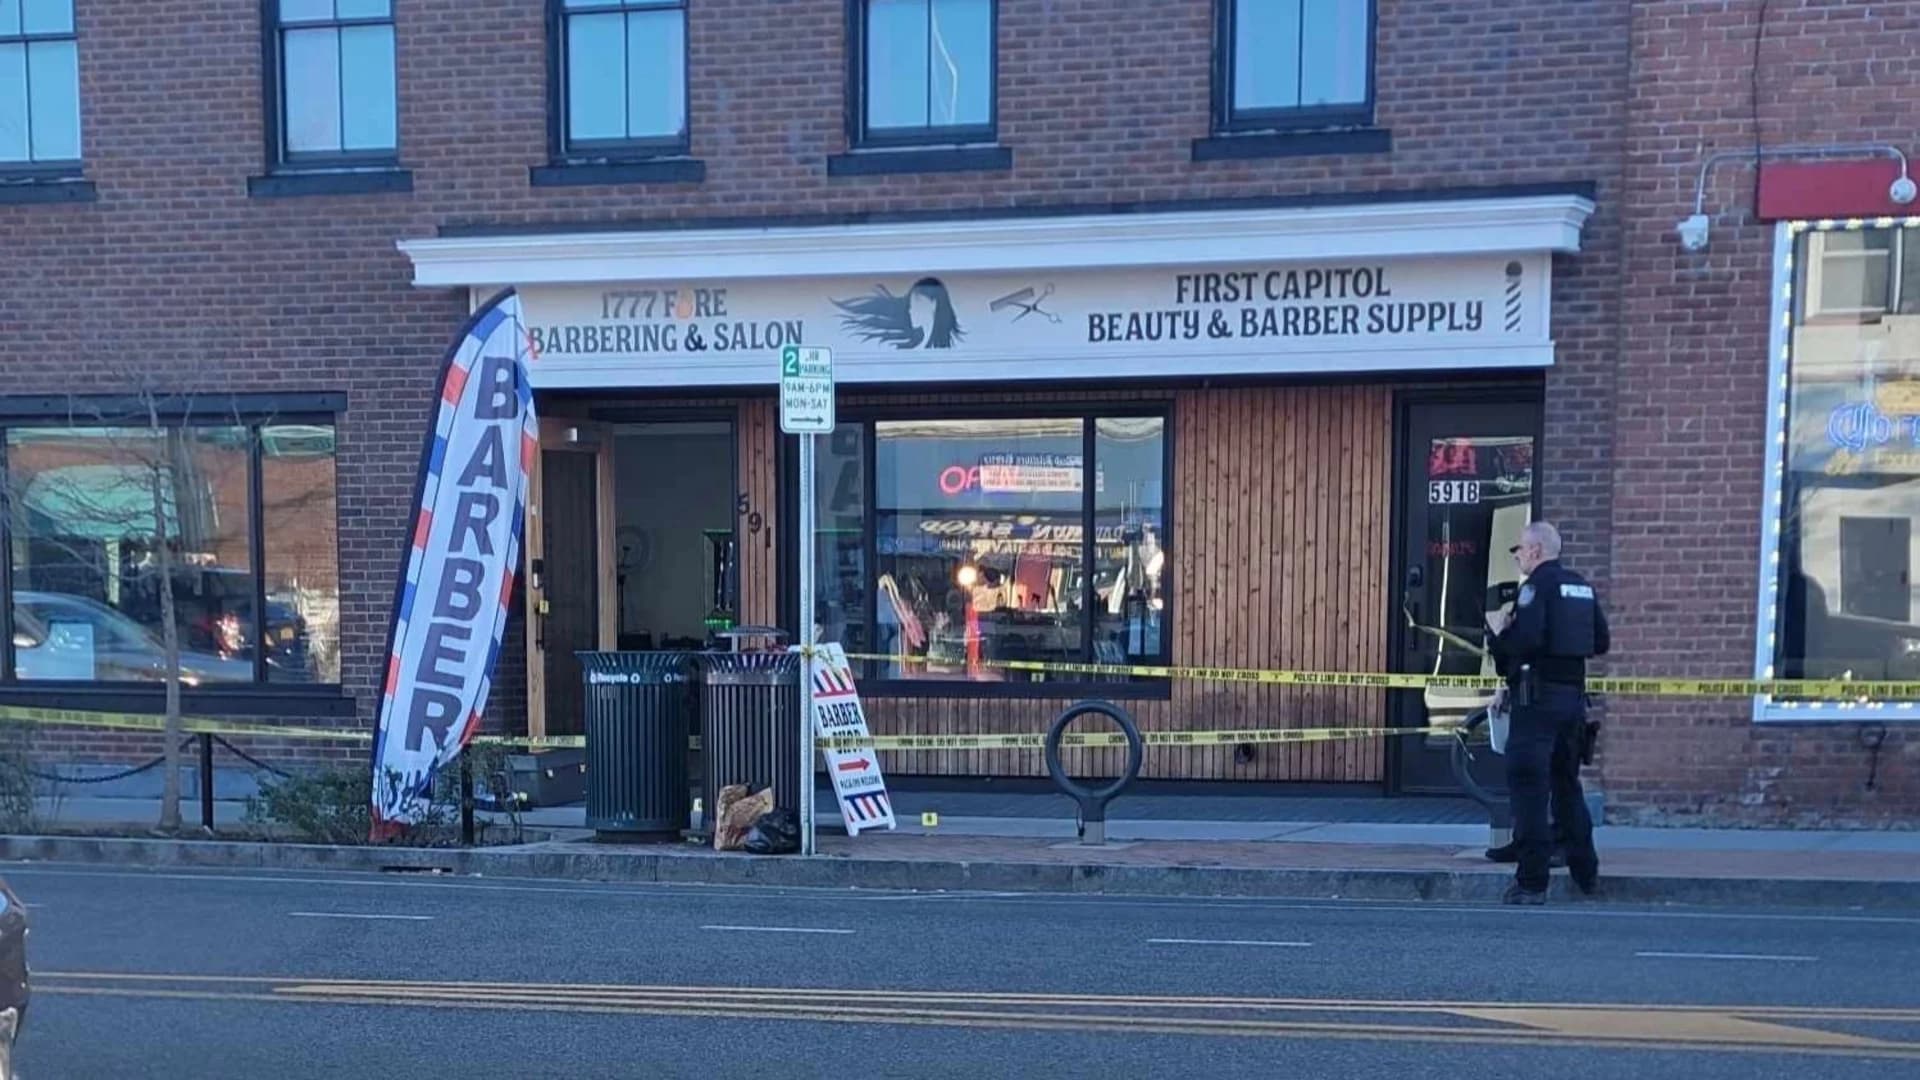 Kingston man charged in barber shop stabbing